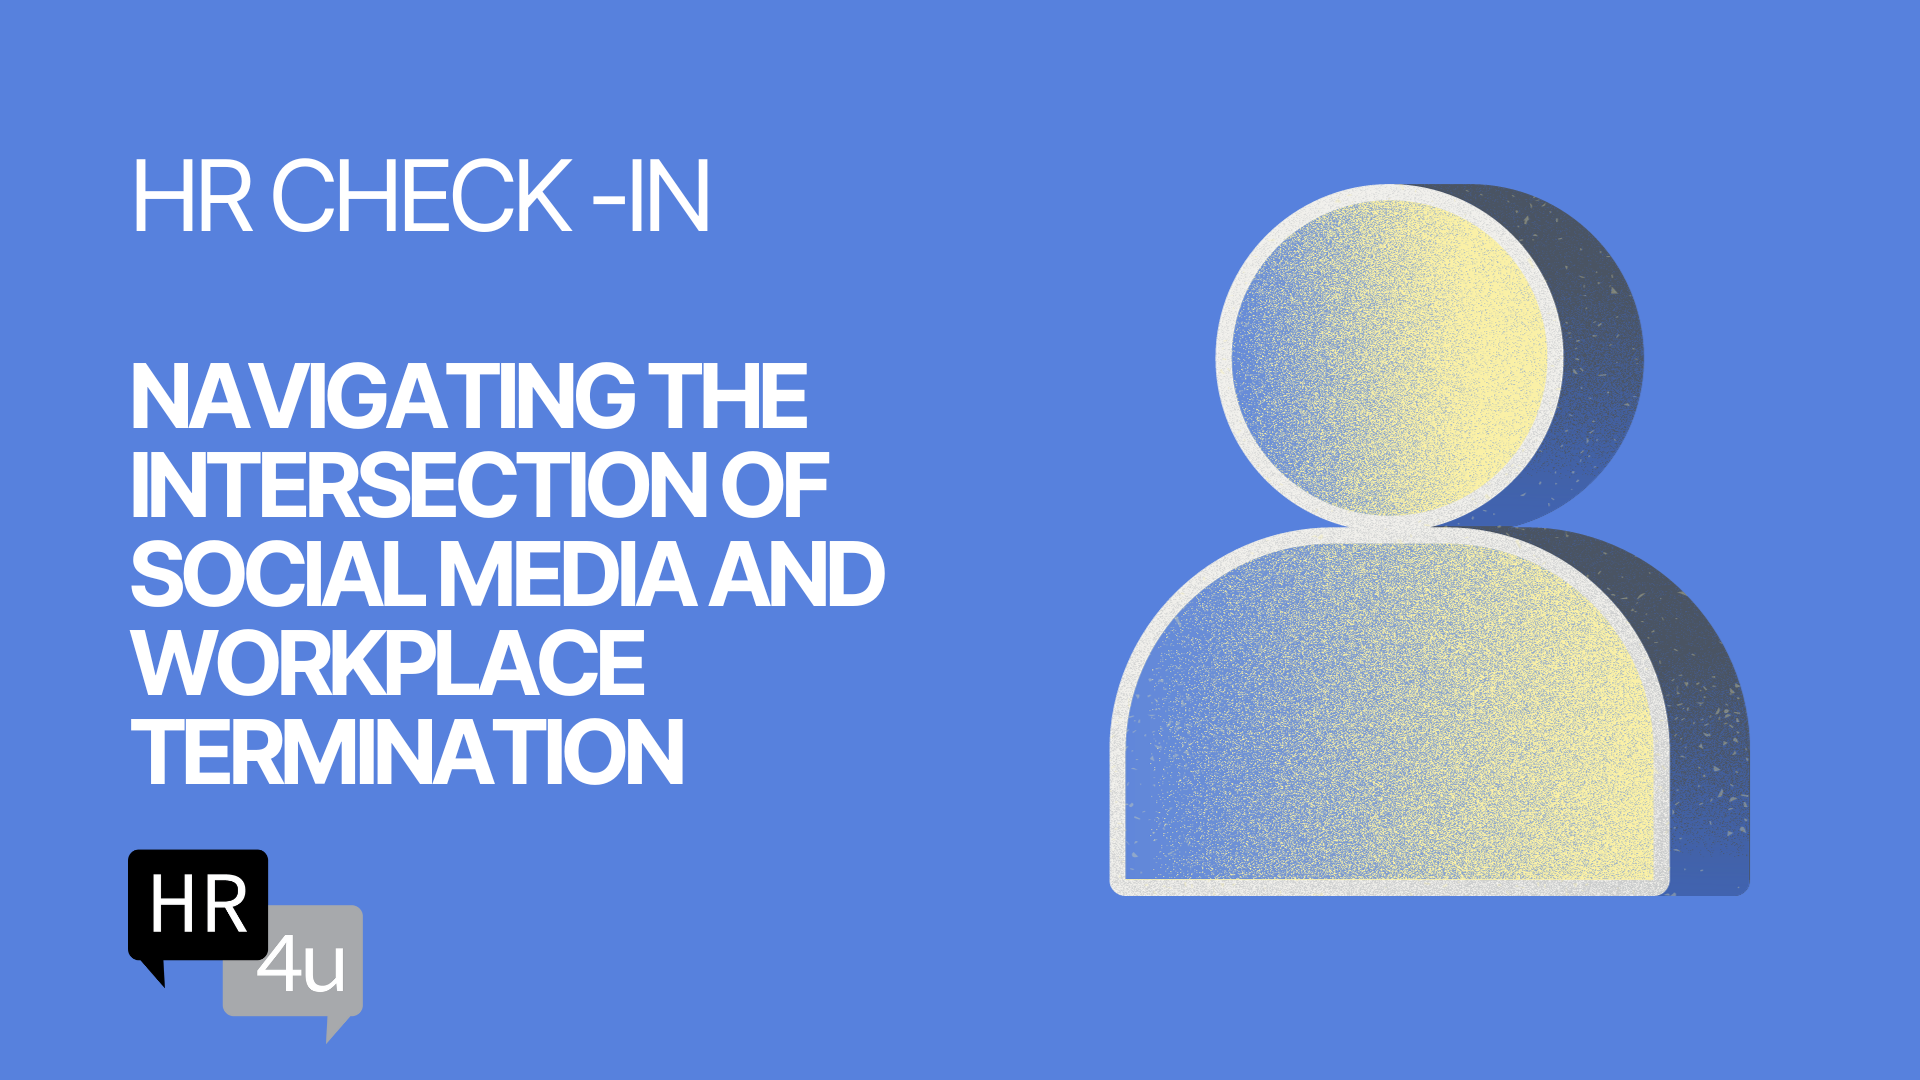 Navigating the Intersection of Social Media and Workplace Termination